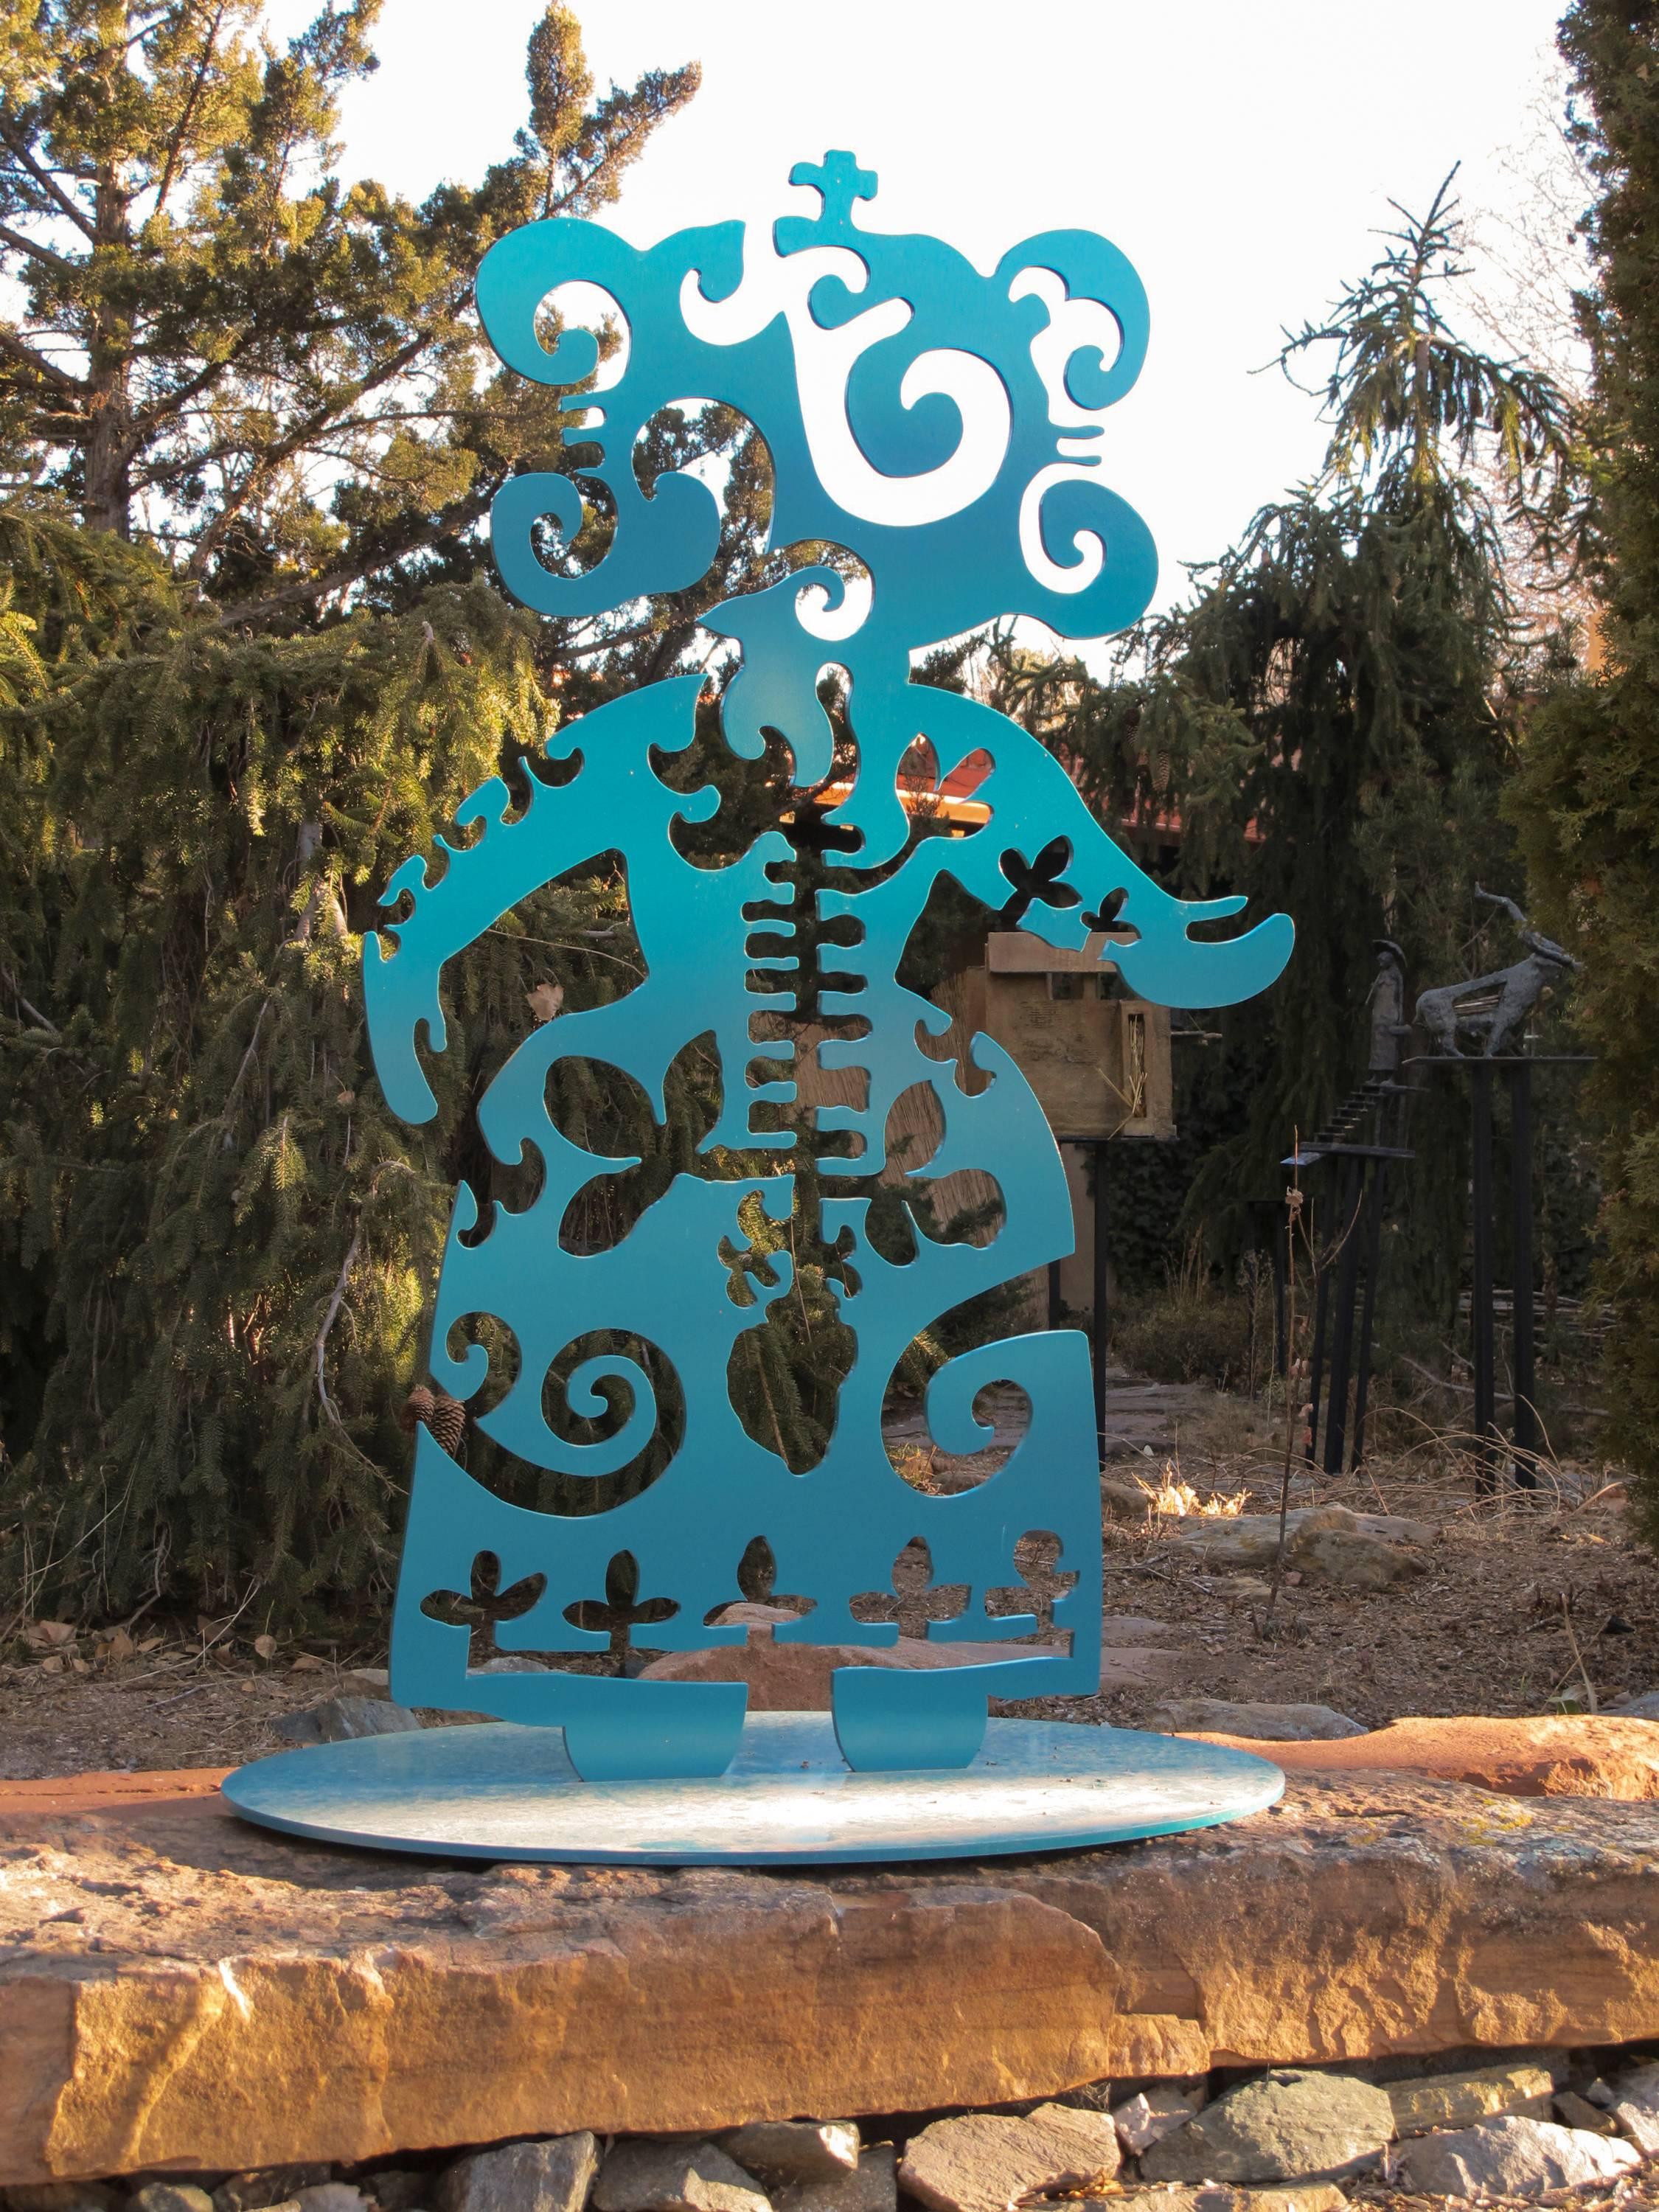 Strength From Within, aluminum, turquoise, Navajo, sculpture, Melanie Yazzie

limited edition of 8 powder coated​ aluminum

This sculpture is a self-portrait of my state of mind when I am working on fixing things from inside myself. As I am thinking